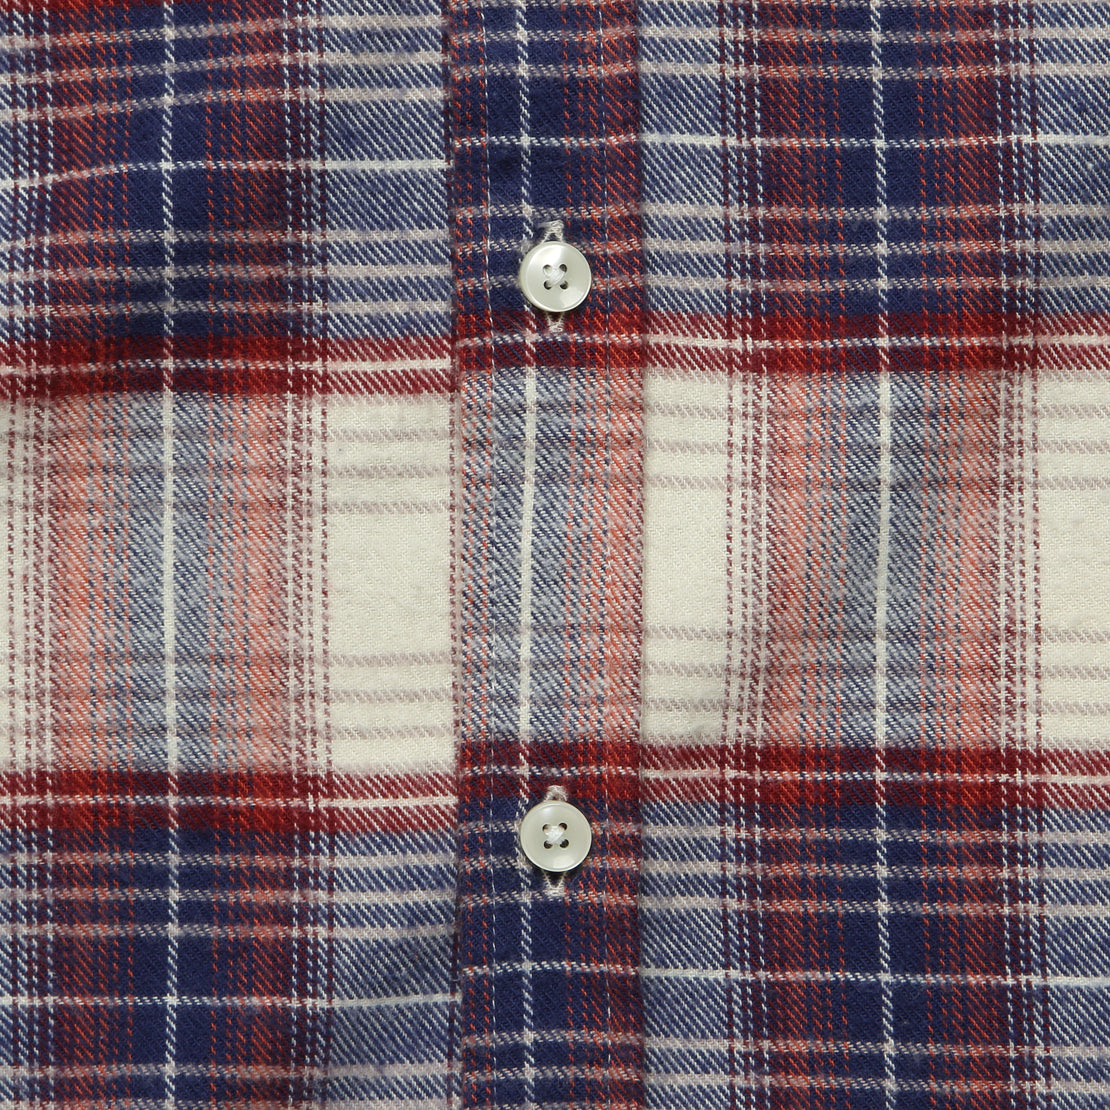 Liber Shirt - Off White/Blue - Portuguese Flannel - STAG Provisions - Tops - L/S Woven - Solid